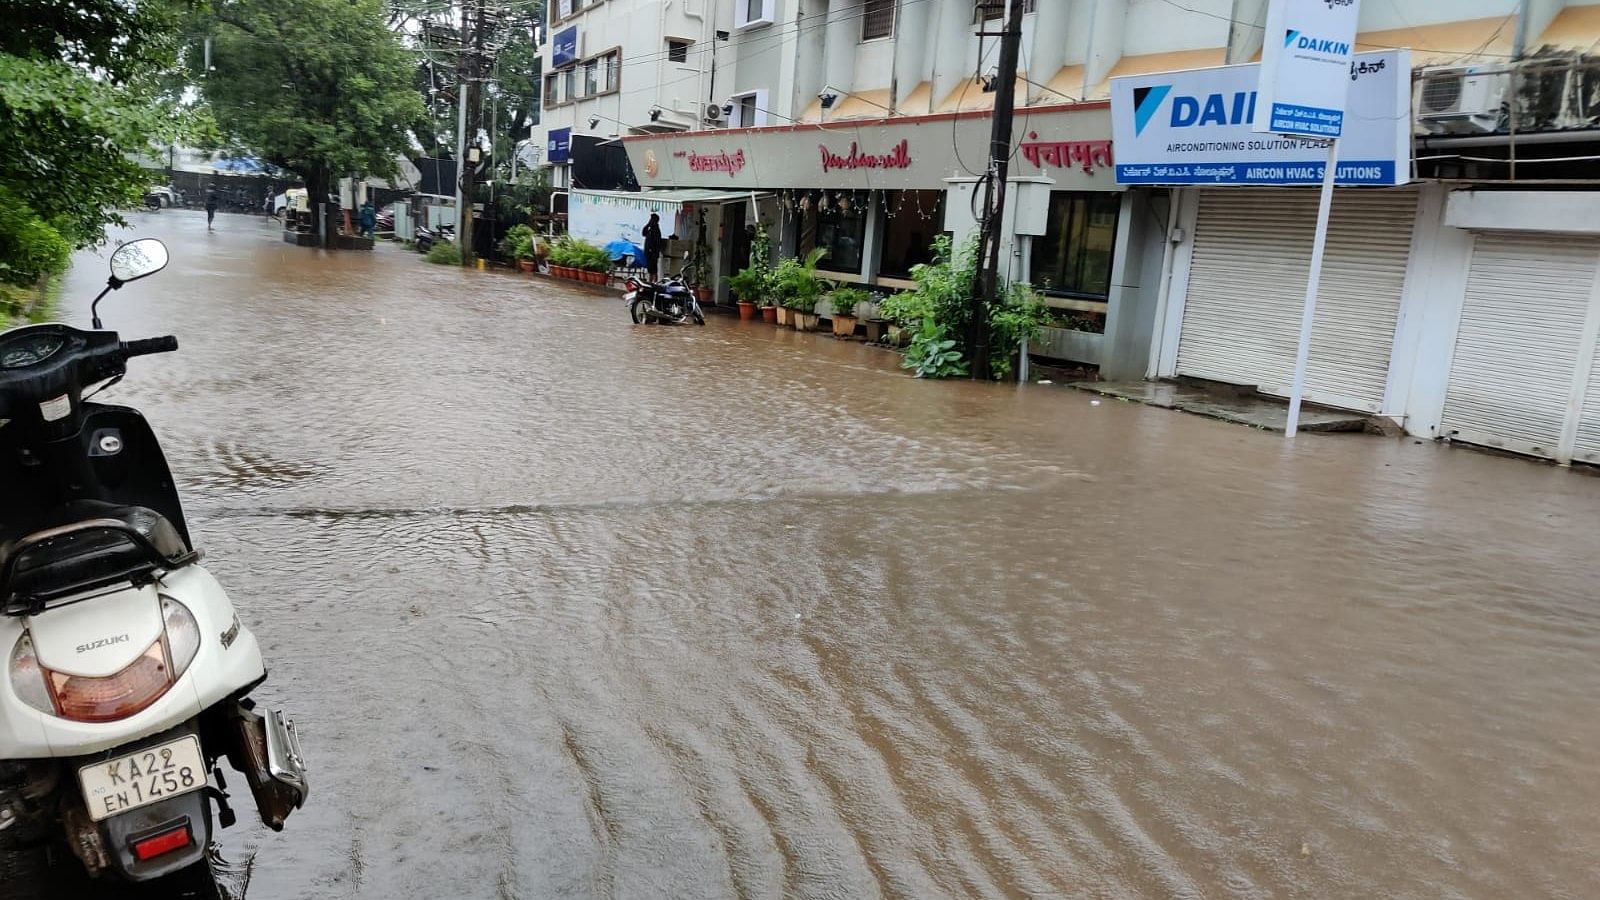 Maratha Colony in Belagavi got flooded with rainwater on Friday with no proper exit points for storm water. Credit: DH photo